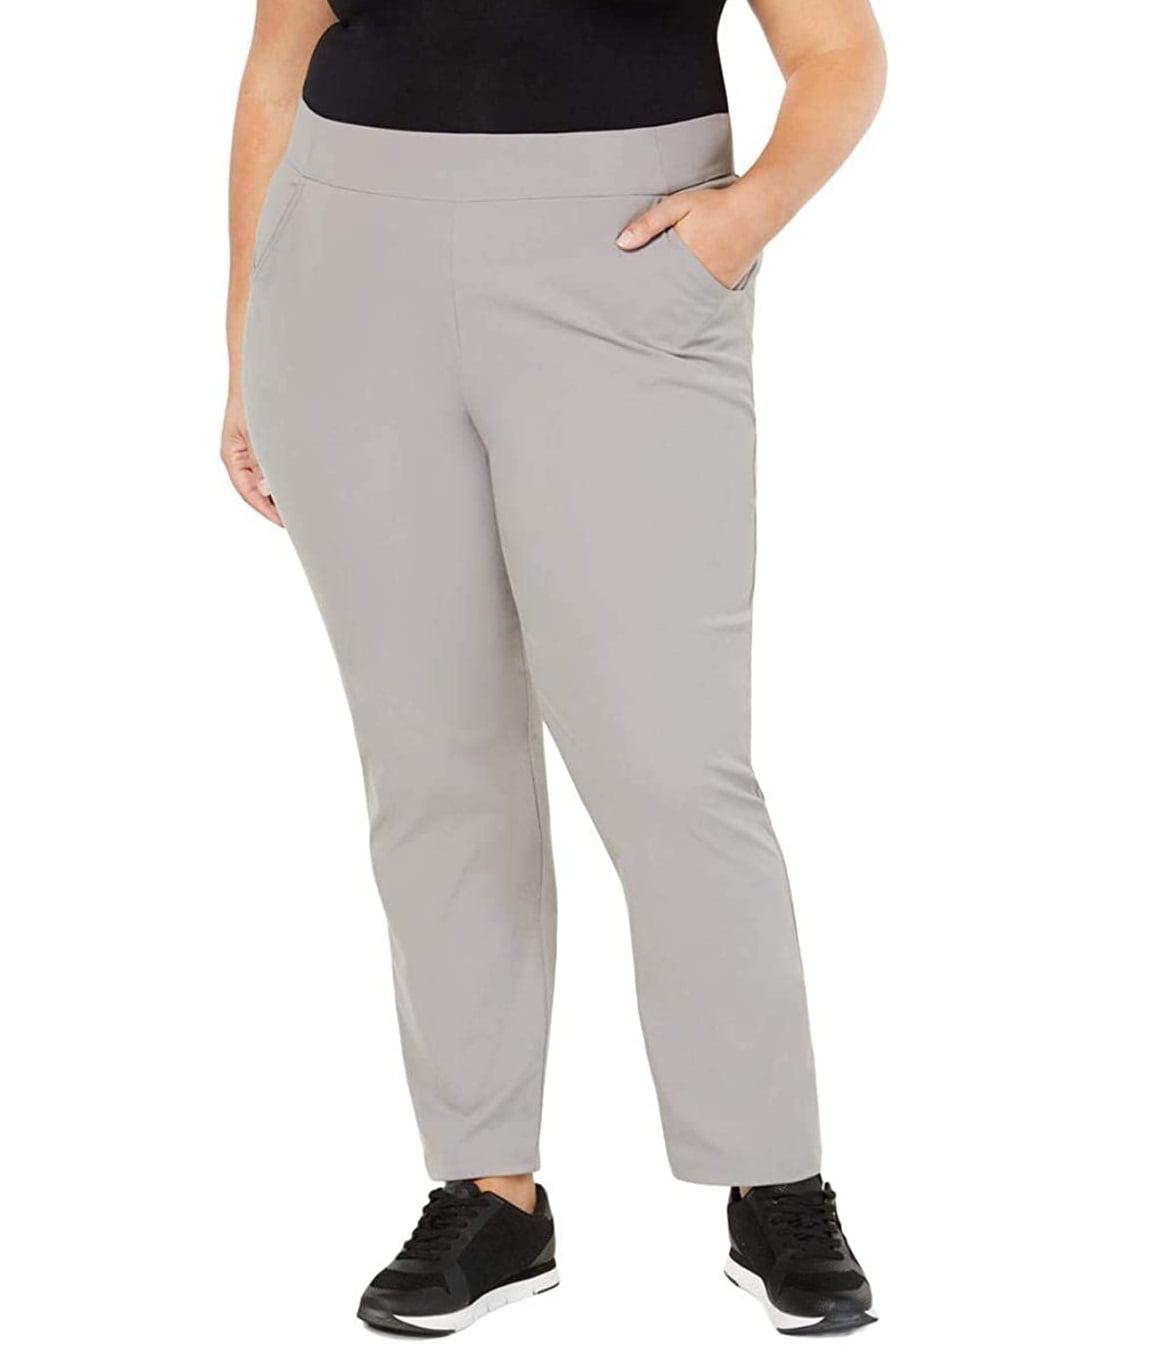 Columbia Women's Plus Size Anytime Casual Pull on Pant Grey Size 3